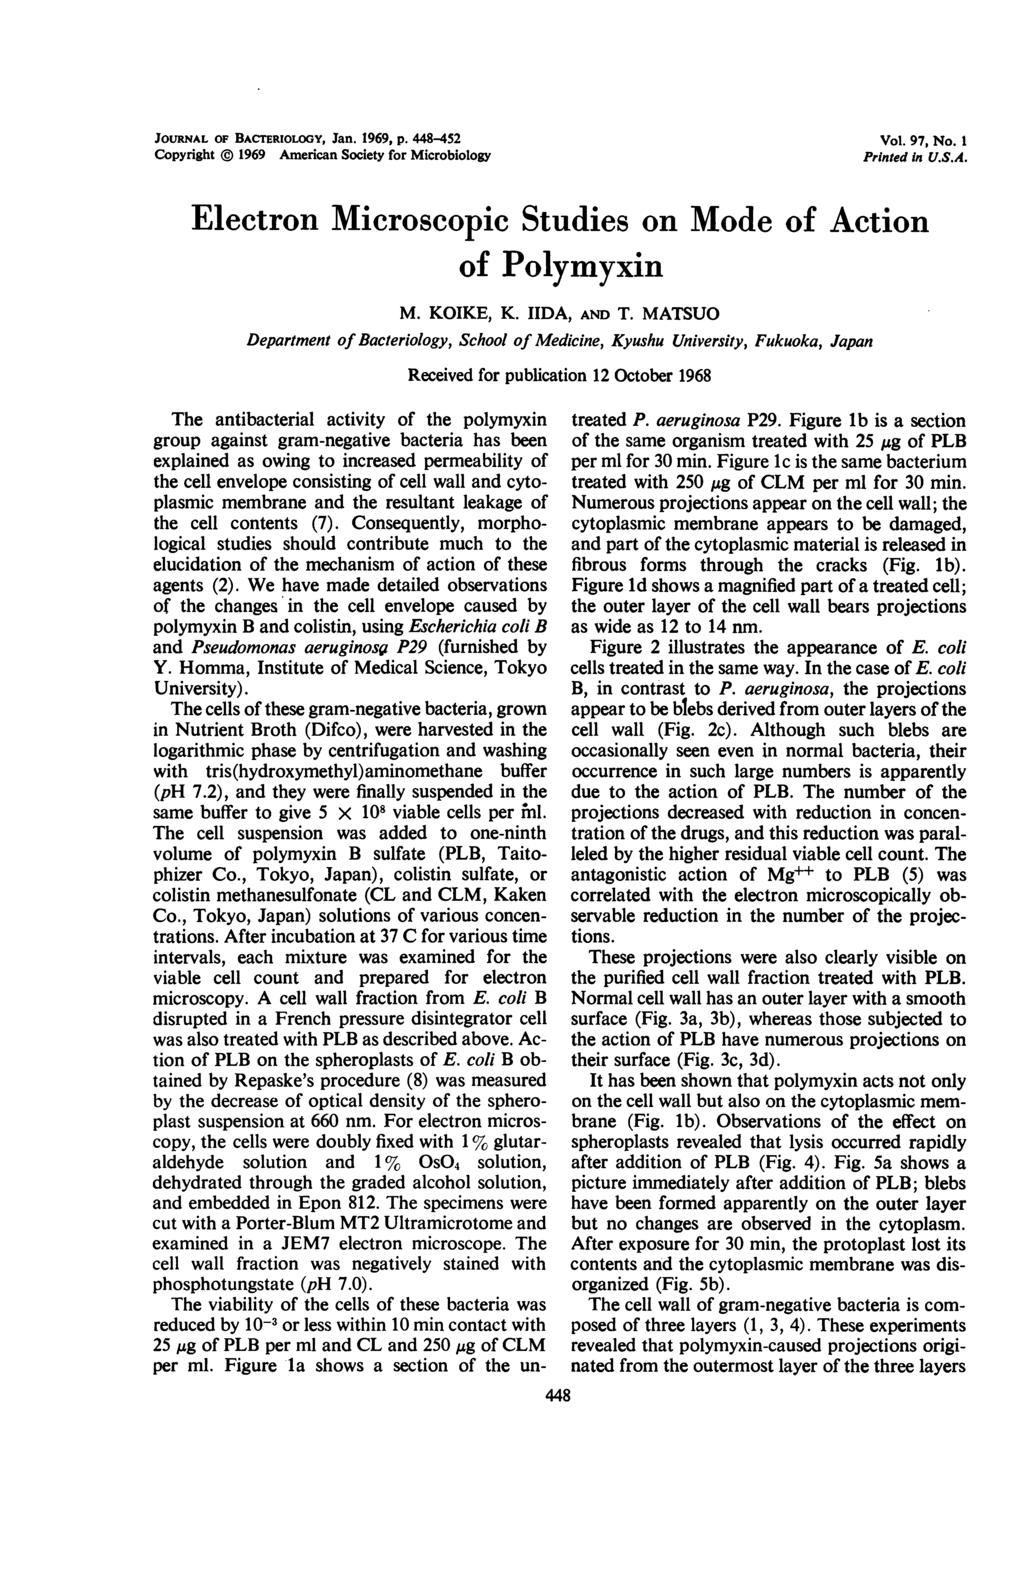 JOURNAL OF BACrERIOLOGY, Jan. 1969, p. 448452 Vol. 97, No. I Copyright 1969 American Society for Microbiology Printed In U.S.A. Electron Microscopic Studies on Mode of Action of Polymyxin M. KOIKE, K.